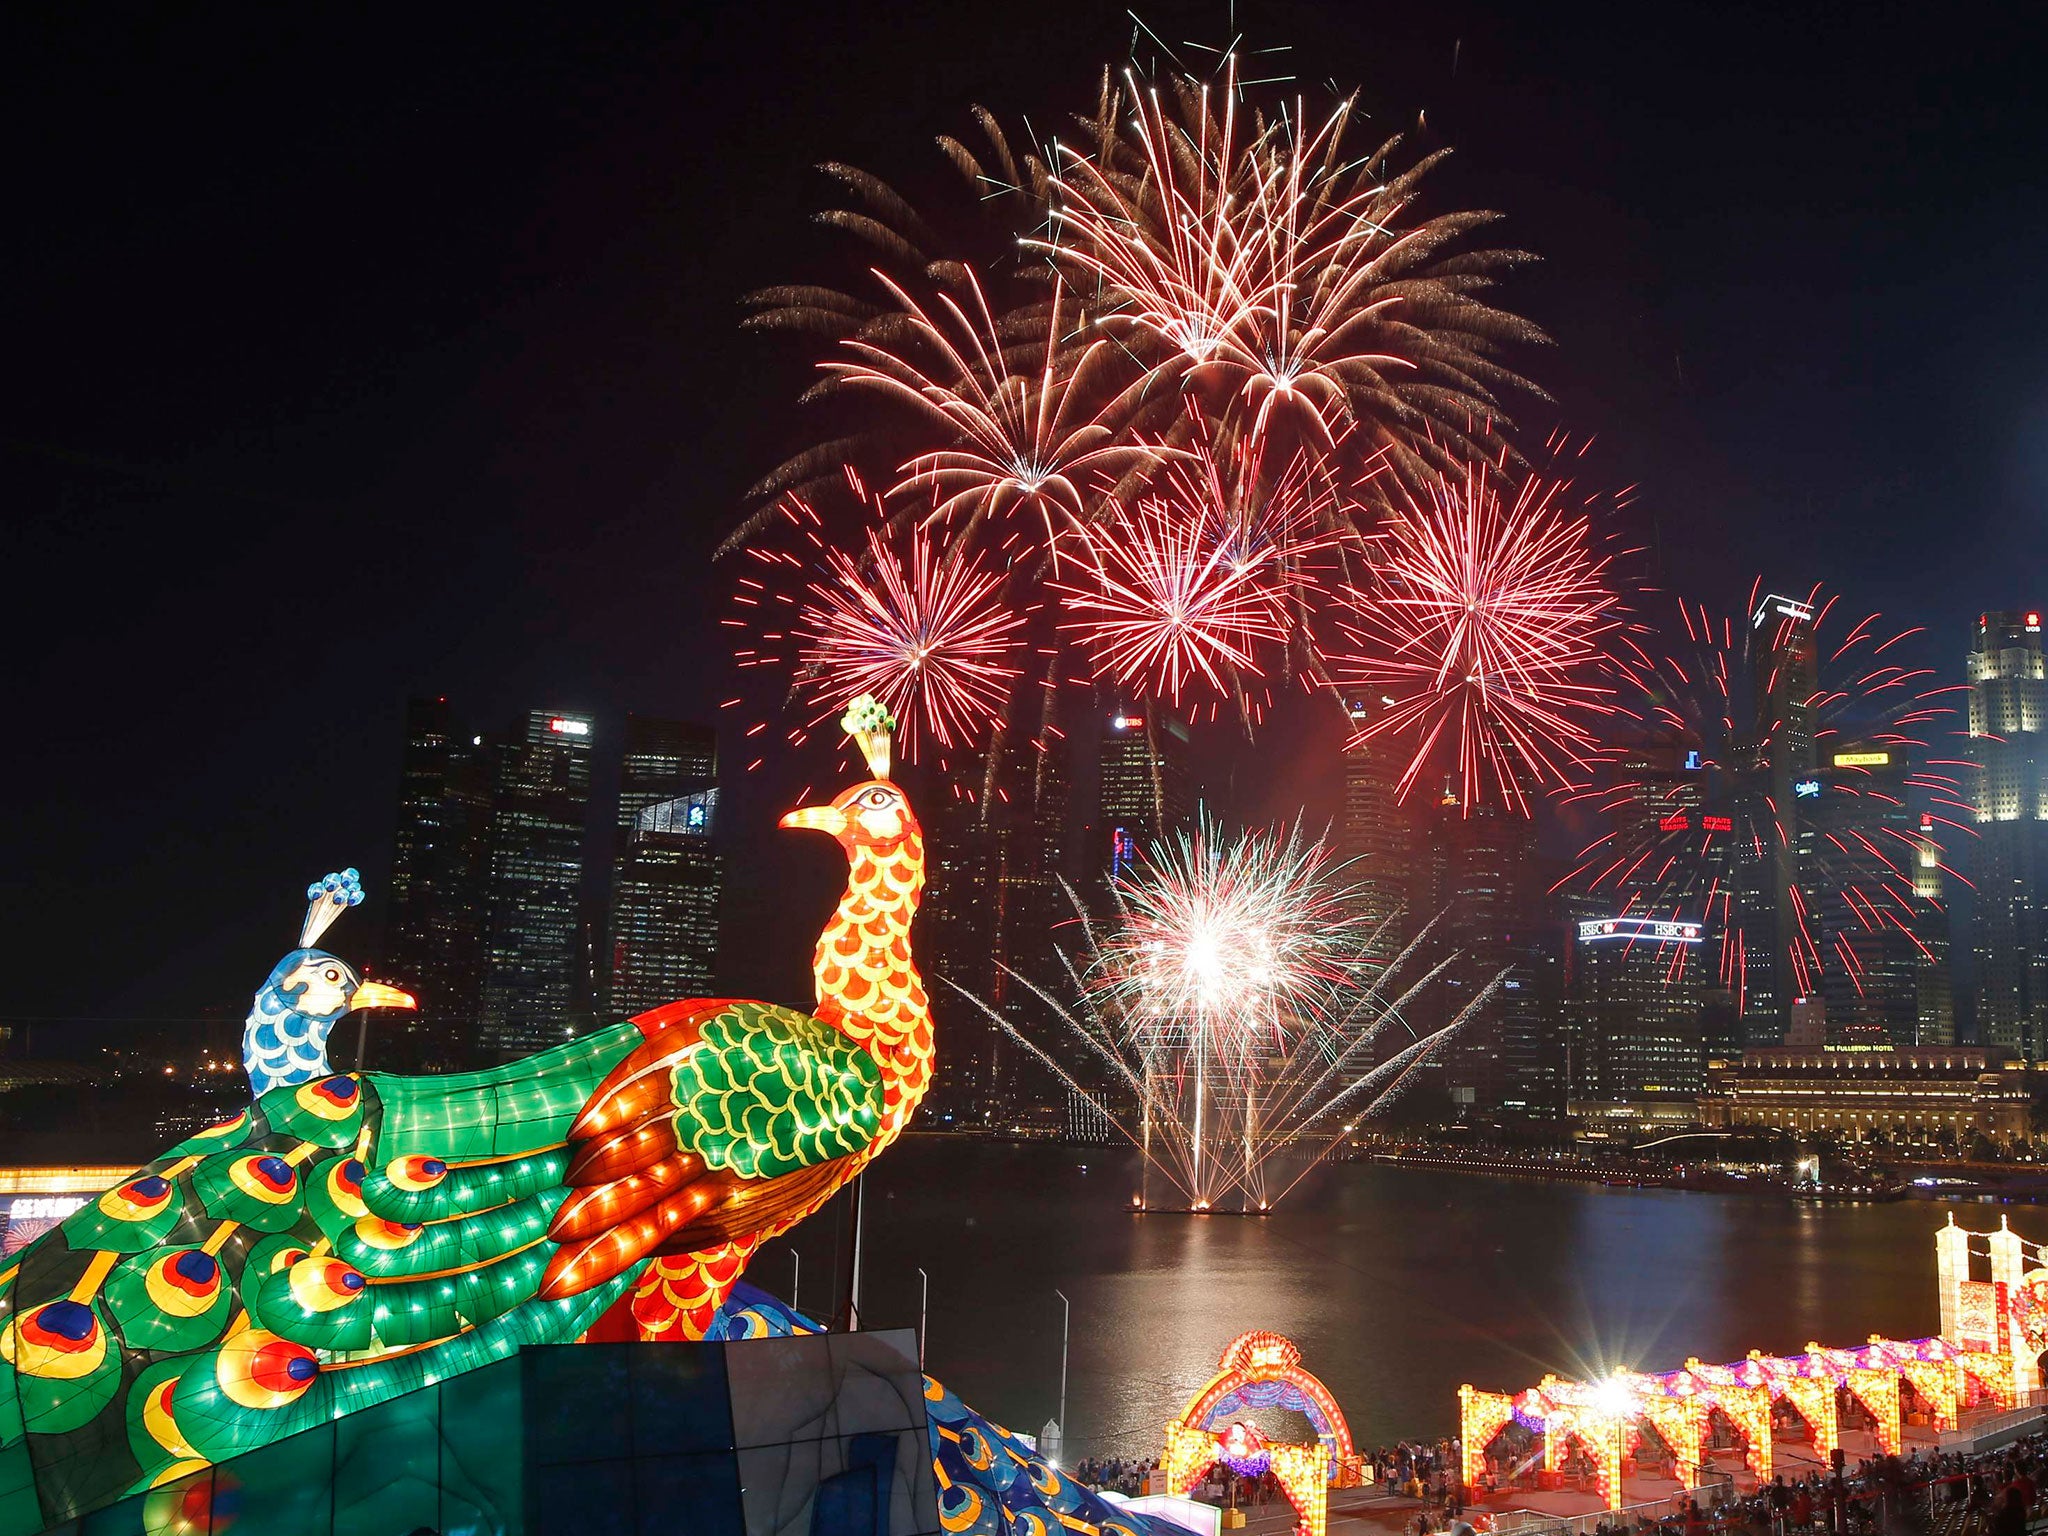 Fireworks explode at the River Hongbao Lunar New Year Celebrations along Marina Bay in Singapore. The Chinese Lunar New Year on February 19 will welcome the Year of the Sheep (also known as the Year of the Goat or Ram)